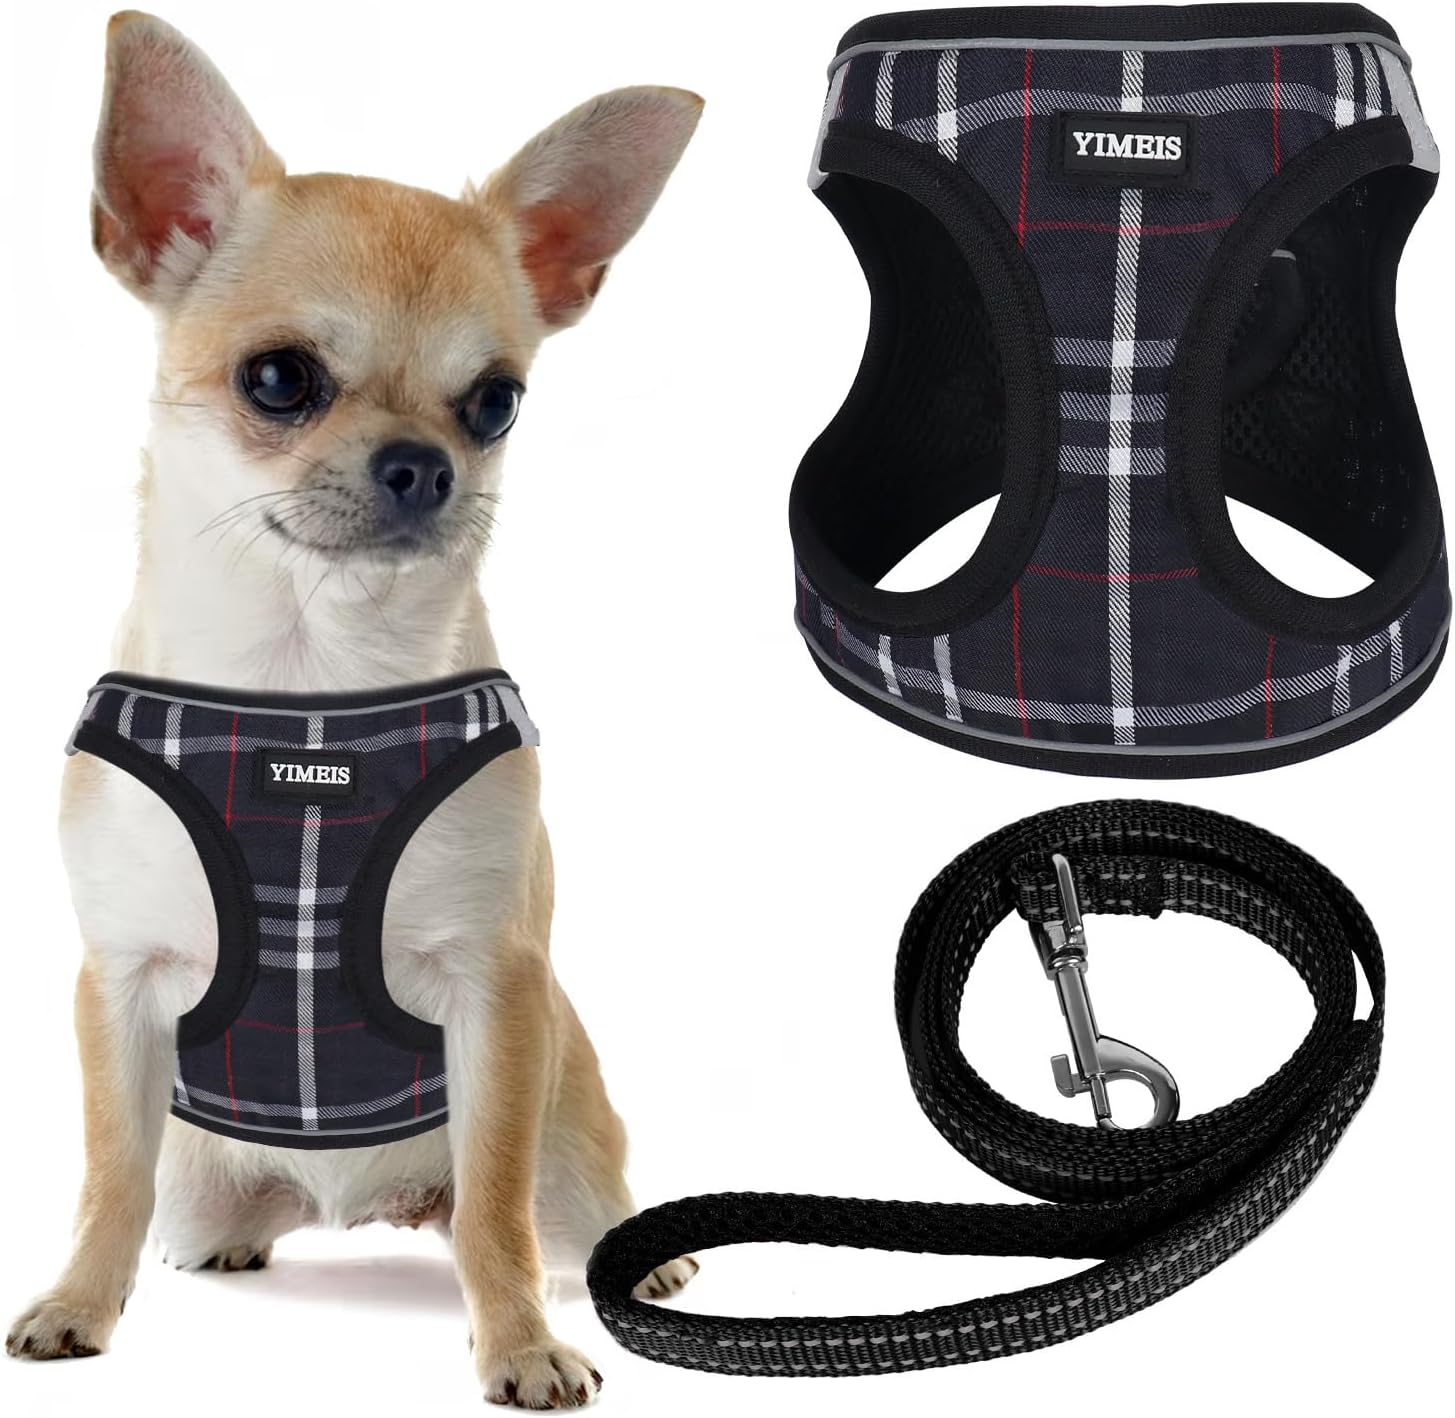 YIMEIS Dog Harness and Leash Set, No Pull Soft Mesh Pet Harness, Reflective Adjustable Puppy Vest for Small Medium Large Dogs, Cats (Black Style 3, Medium (Pack of 1)